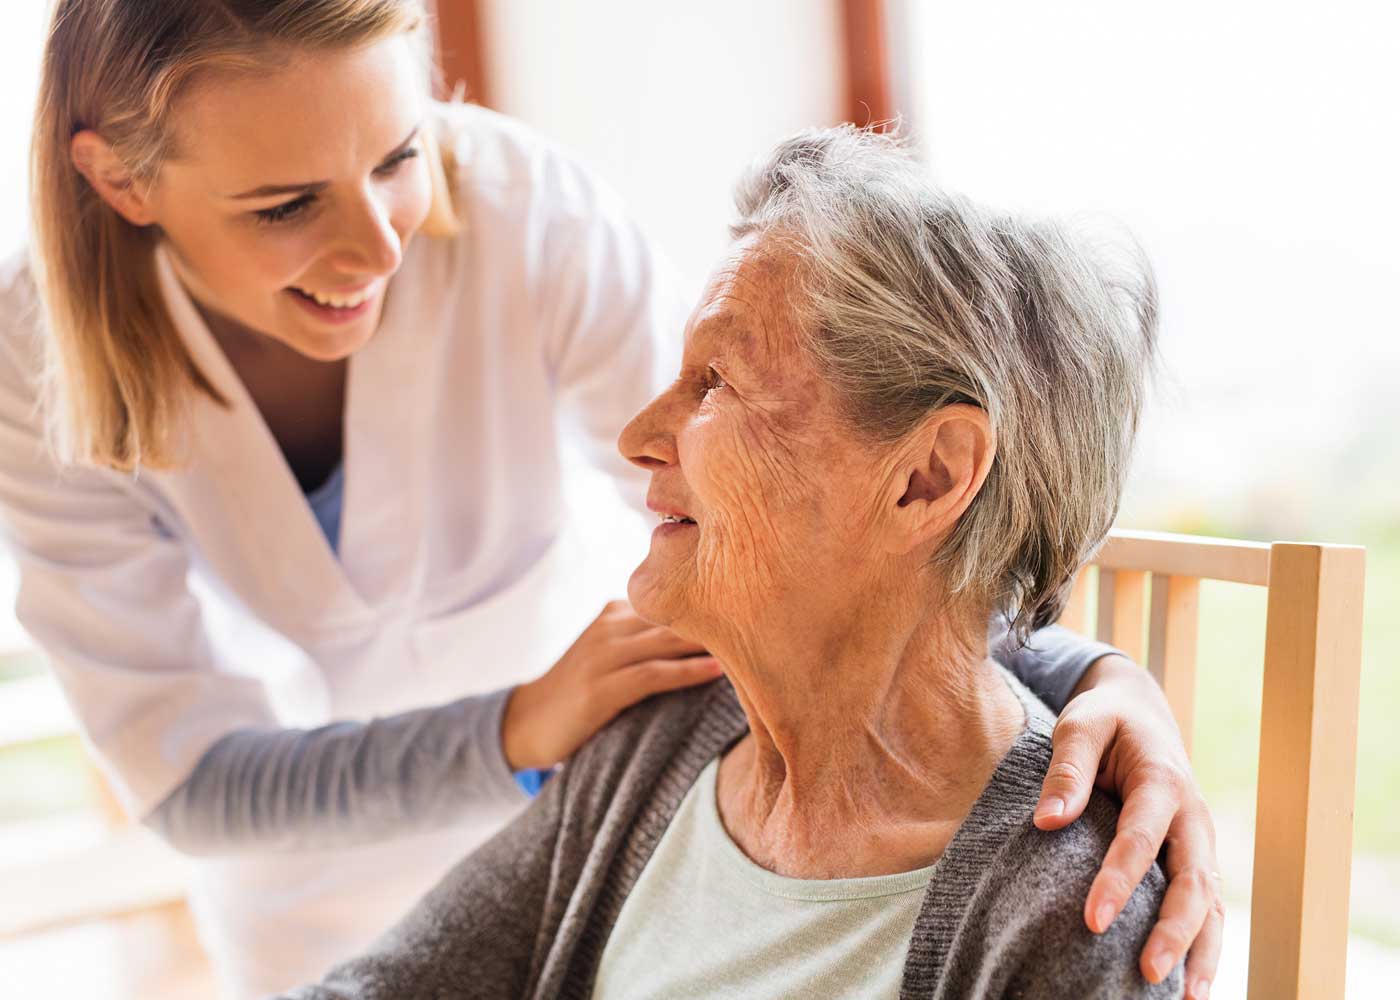 Female caregiver with both hands on older woman's shoulders; smiling at each other